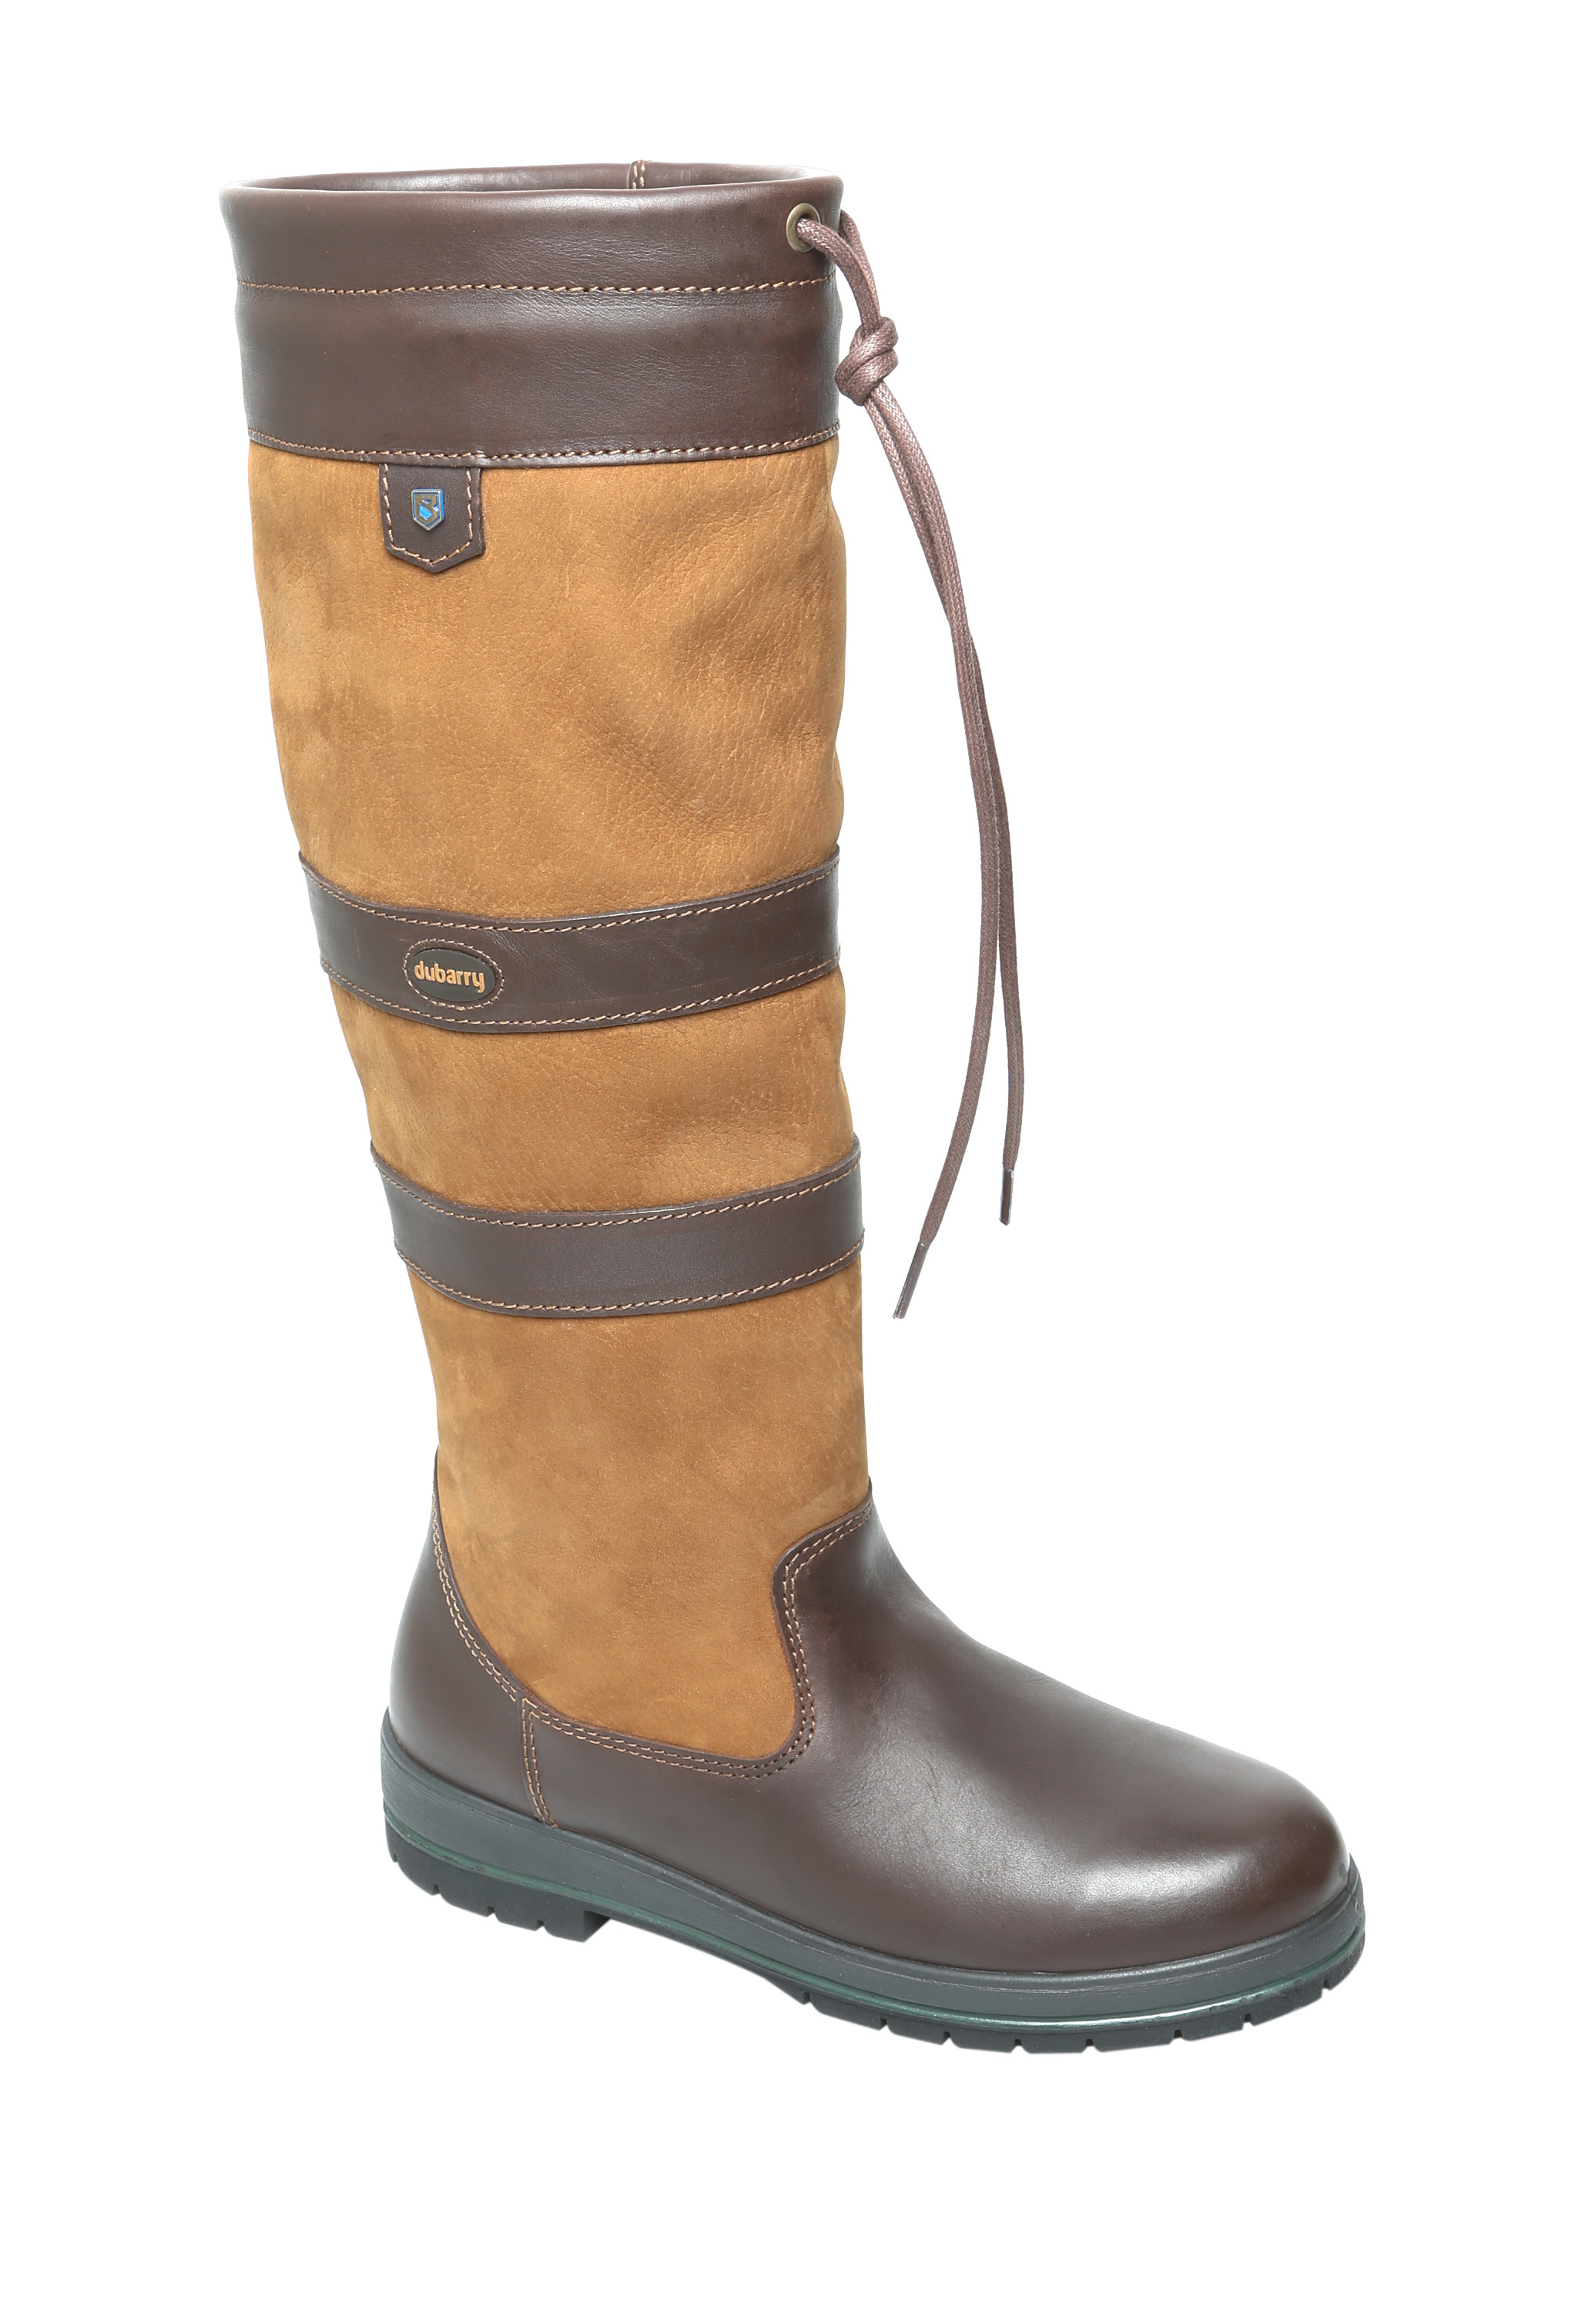 Dubarry Galway Boots - Company